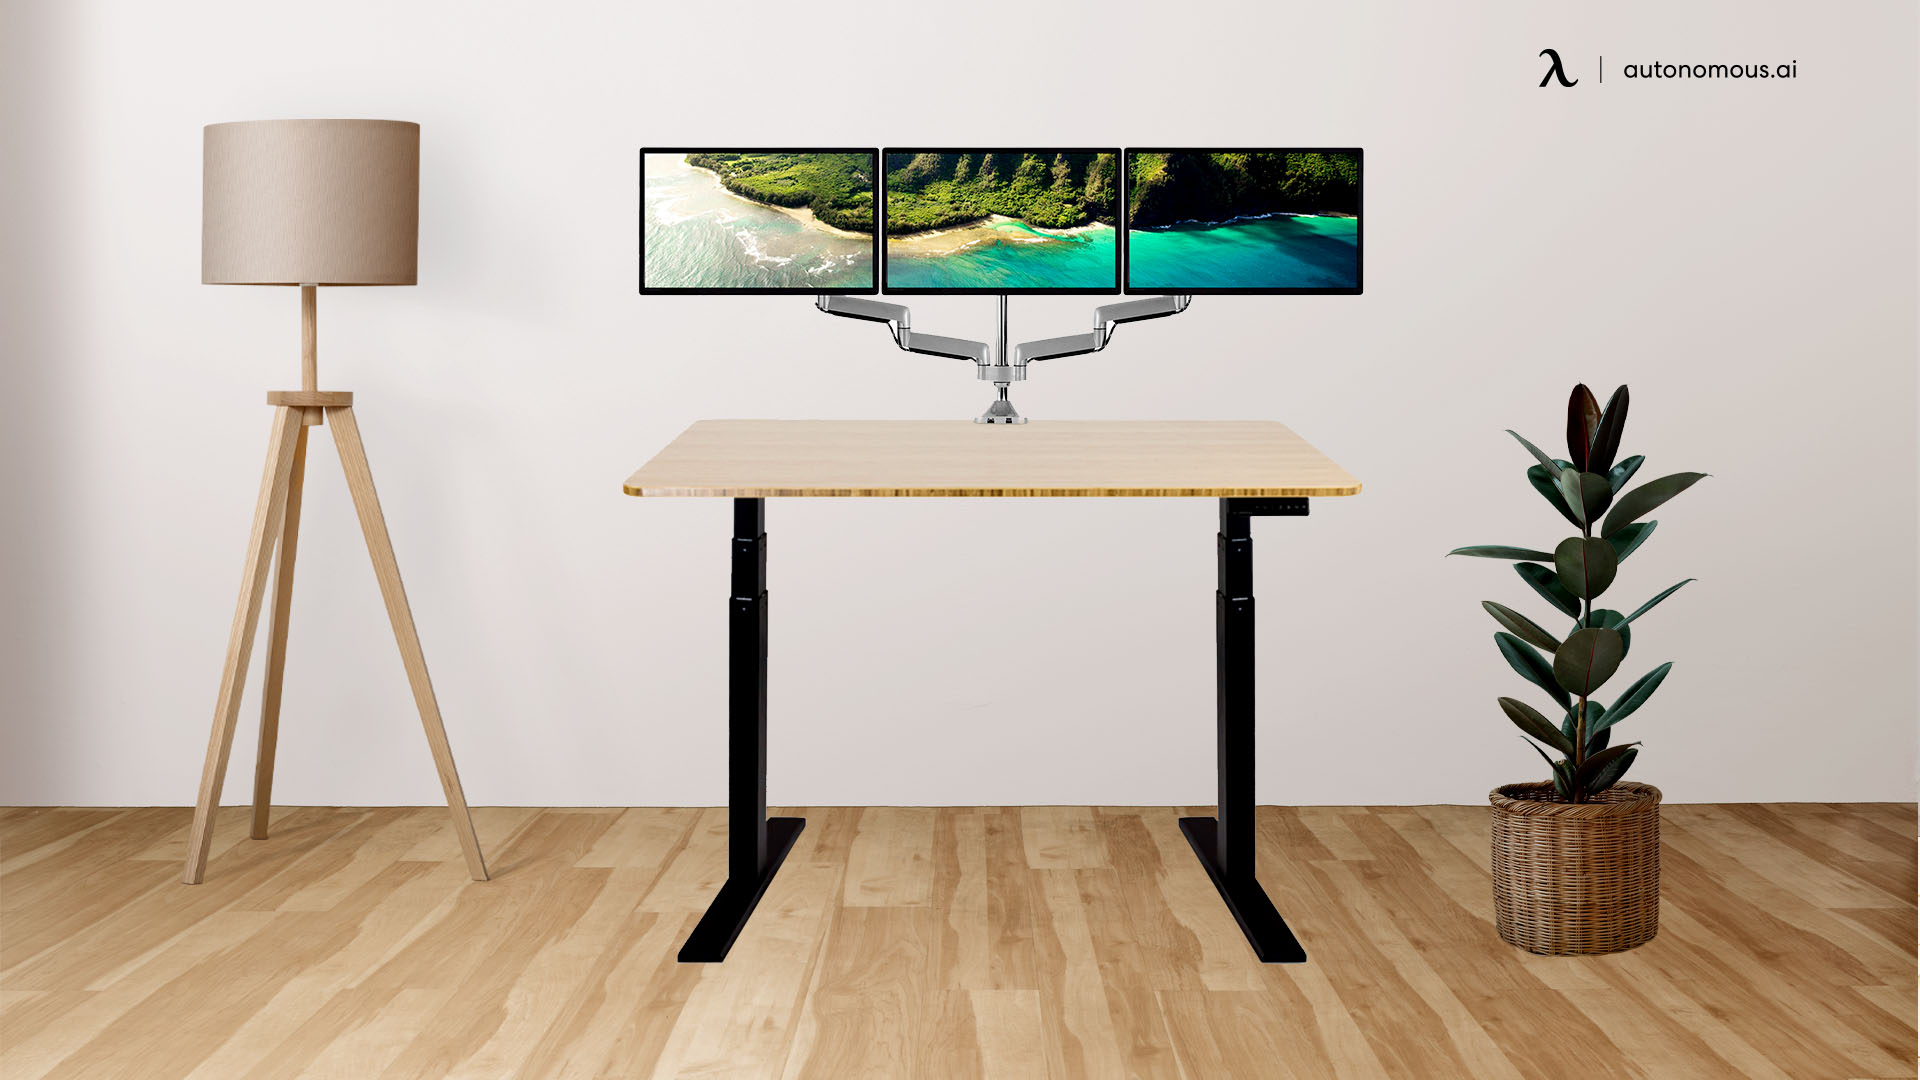 Triple Monitor Arm for 27 Inch Monitor (2022 Listing)